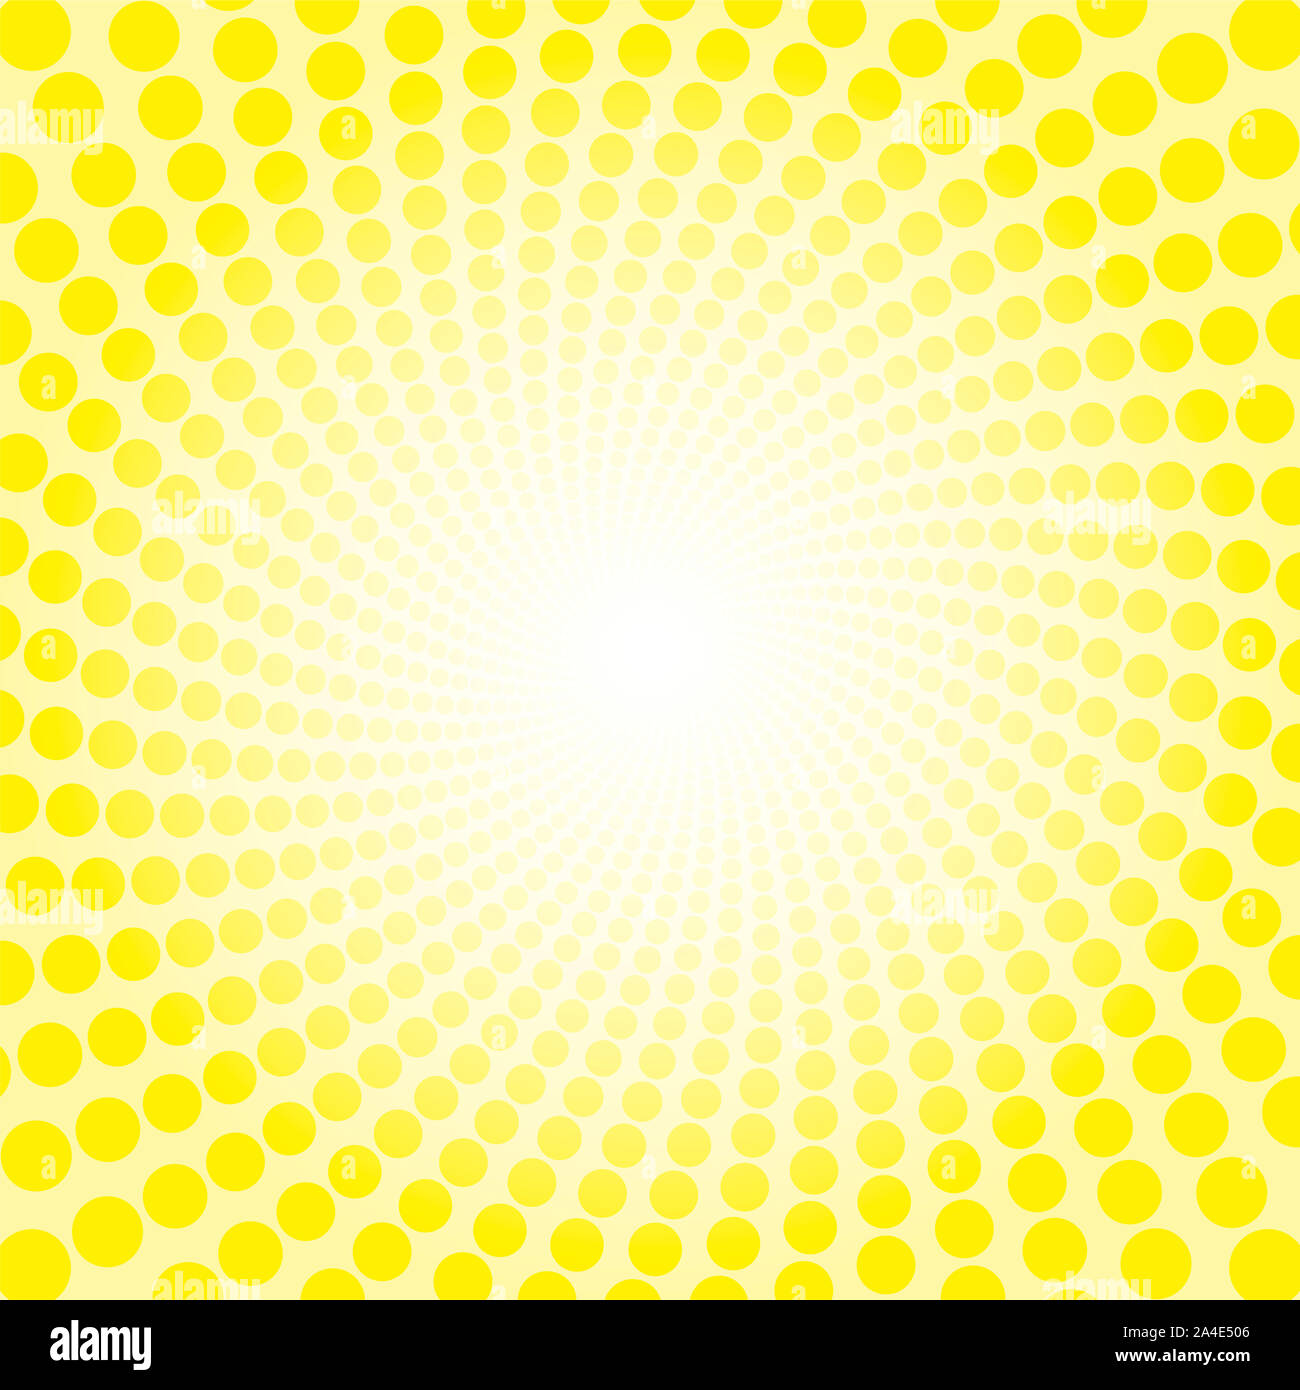 Yellow freshness spirale sun light pattern. Dotted tunnel with bright center - twisted circular background illustration, hypnotic and psychedelic. Stock Photo